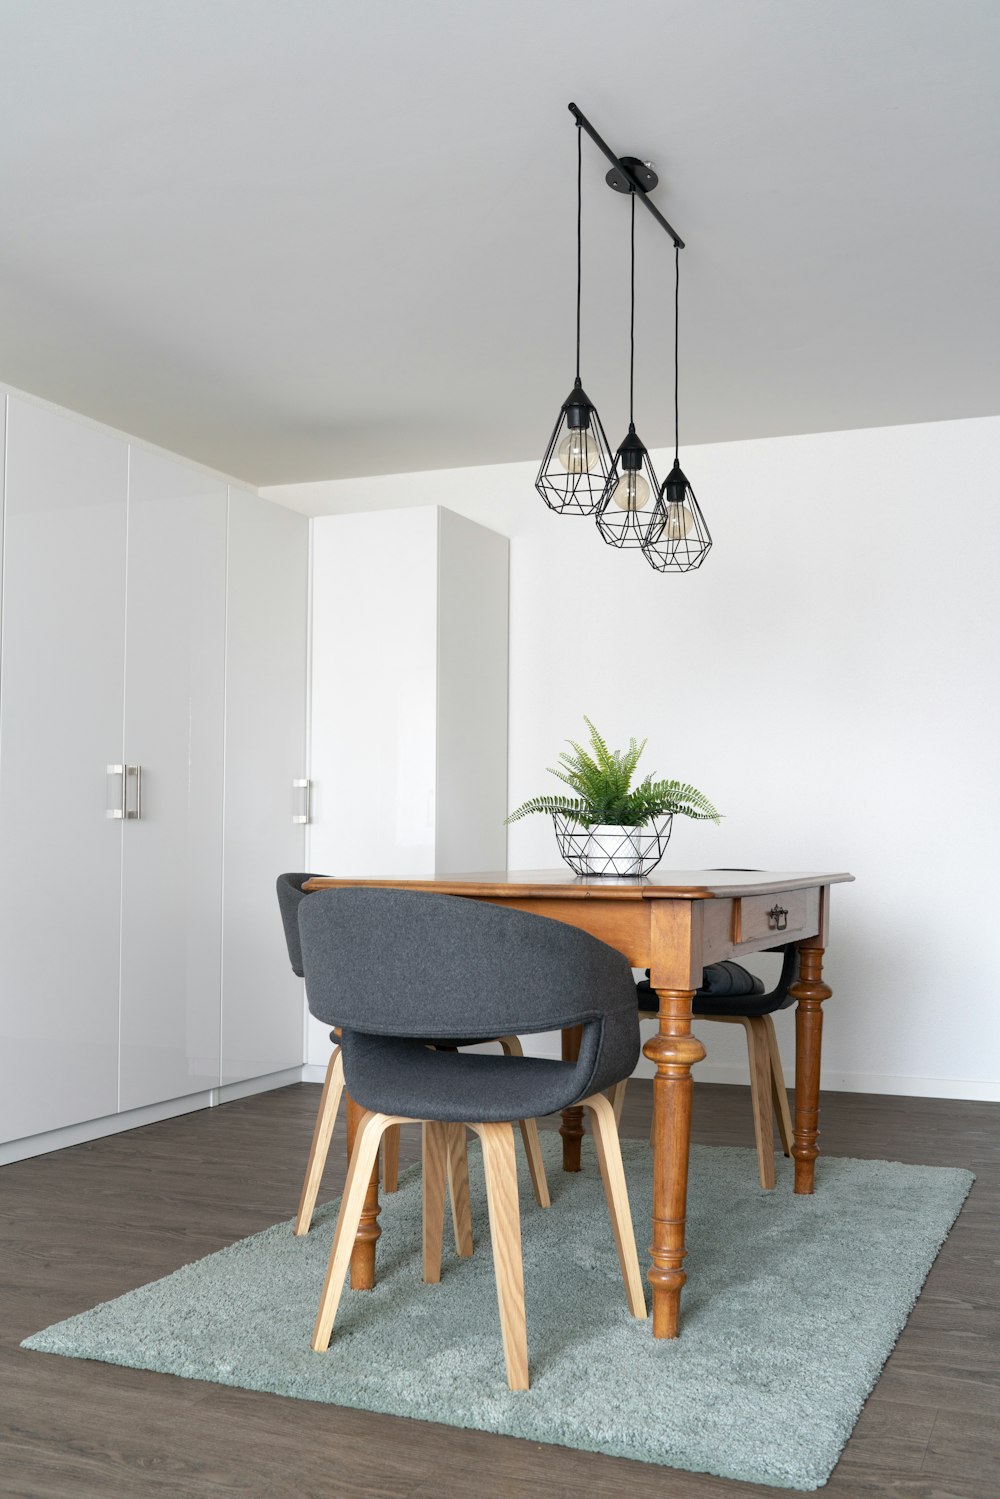 black and white pendant lamp above brown wooden table